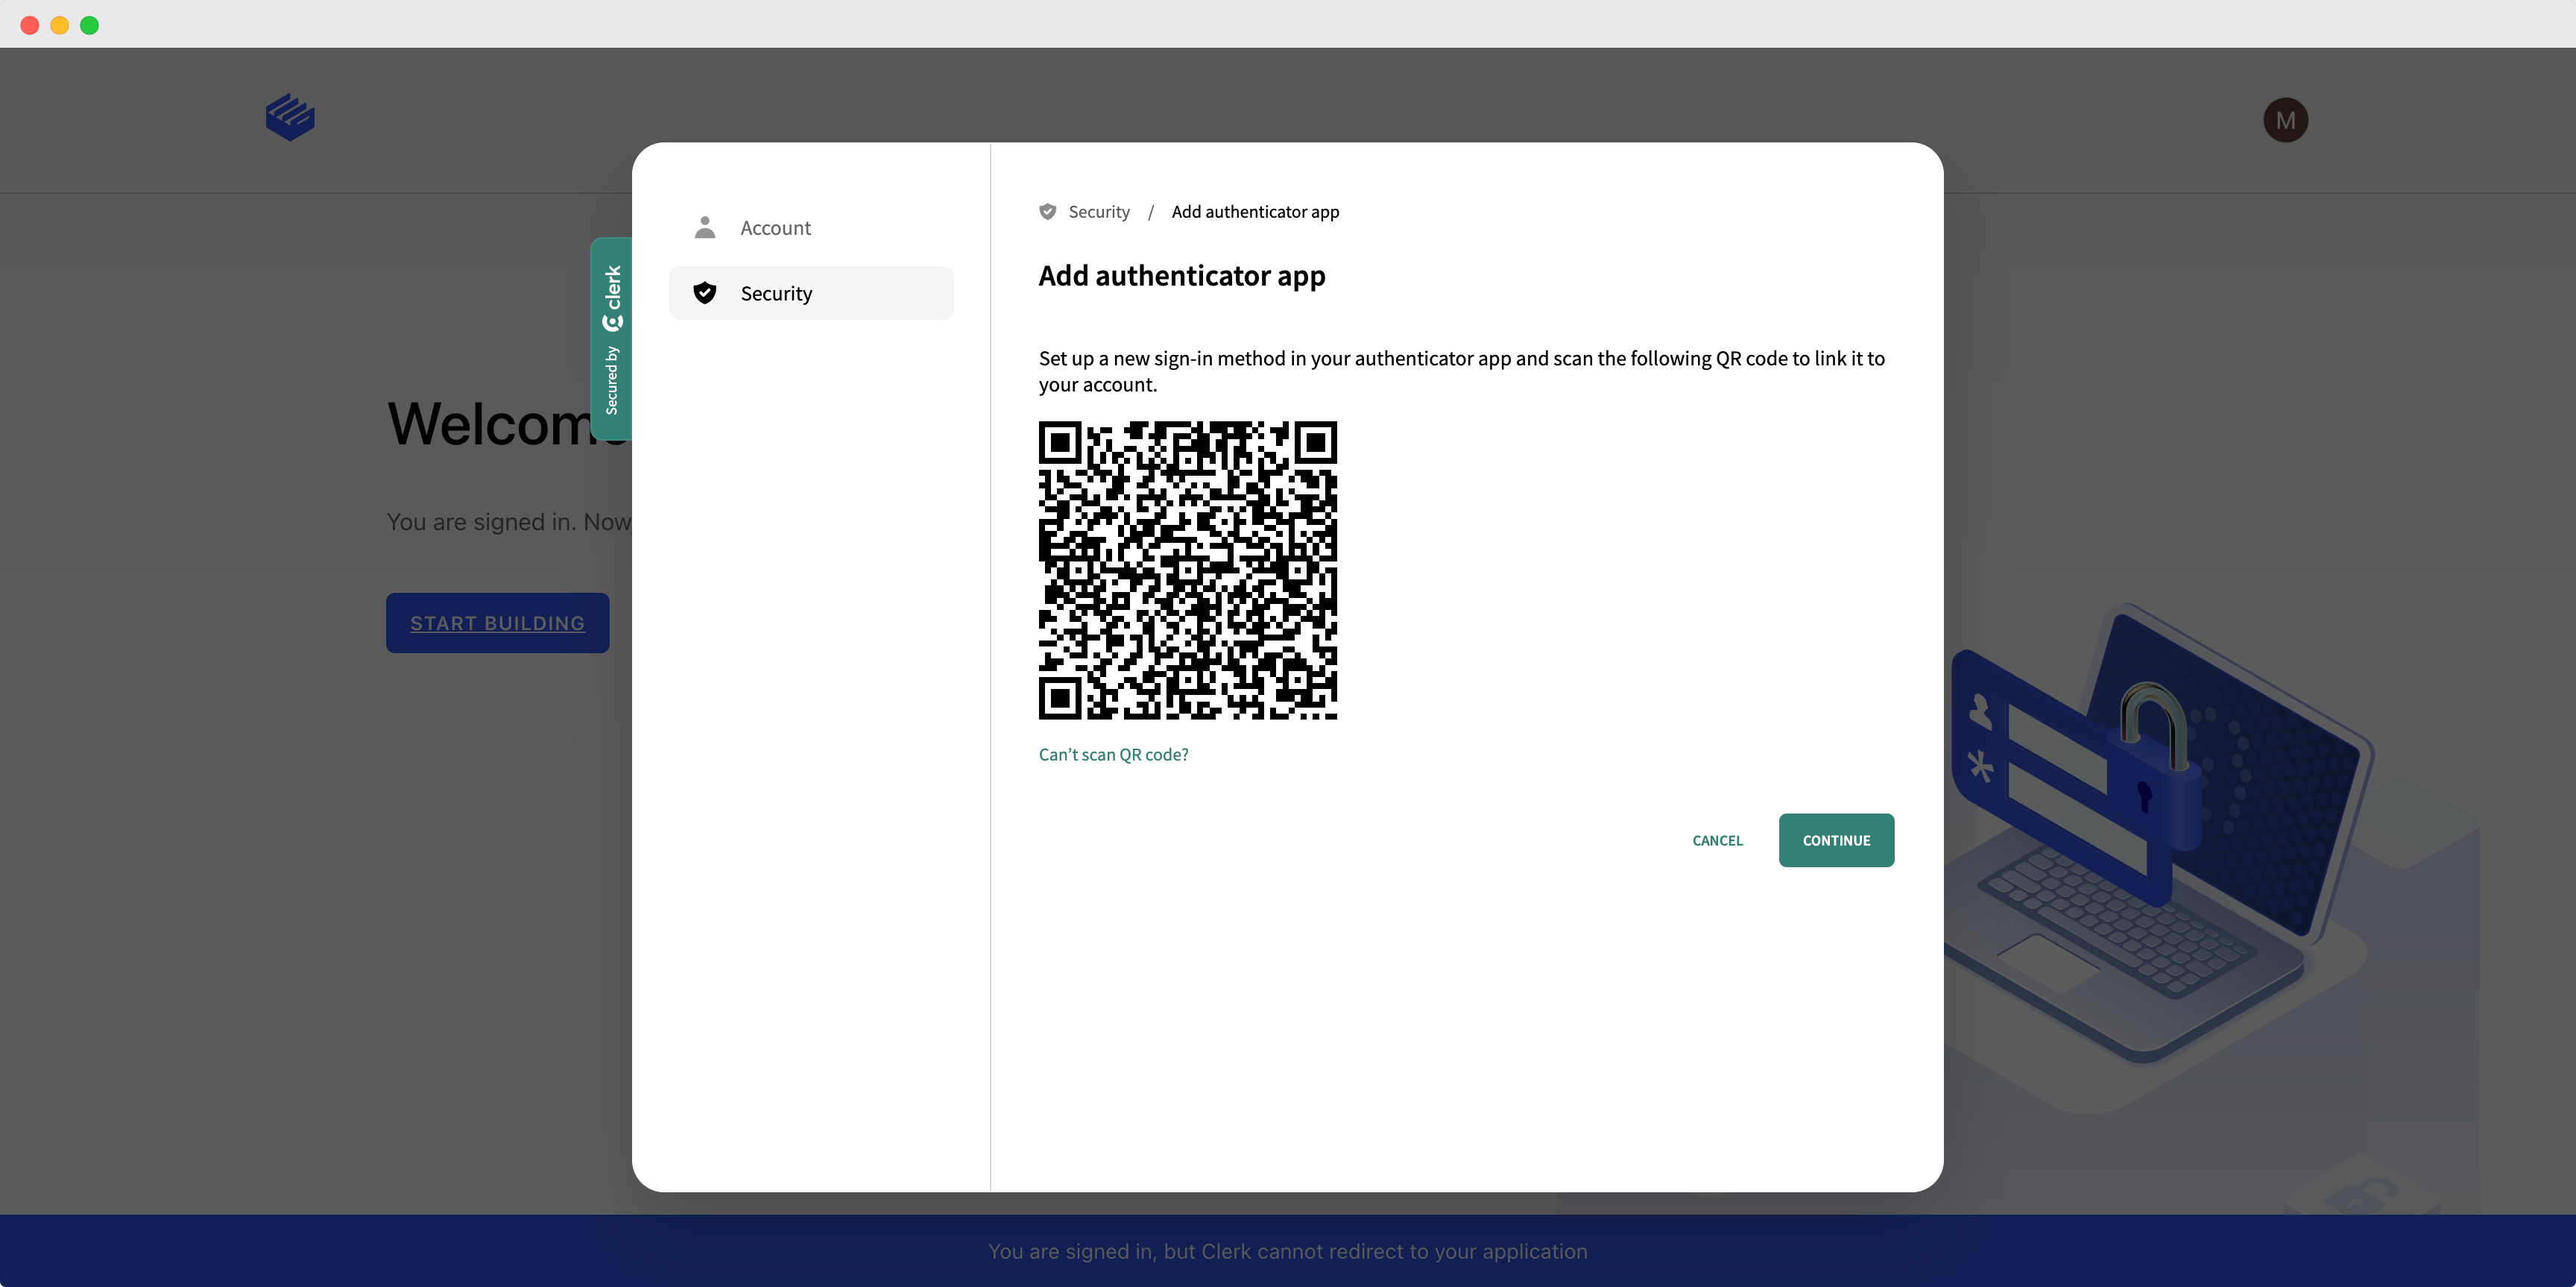 QR code for registering Clerk on an authenticator application